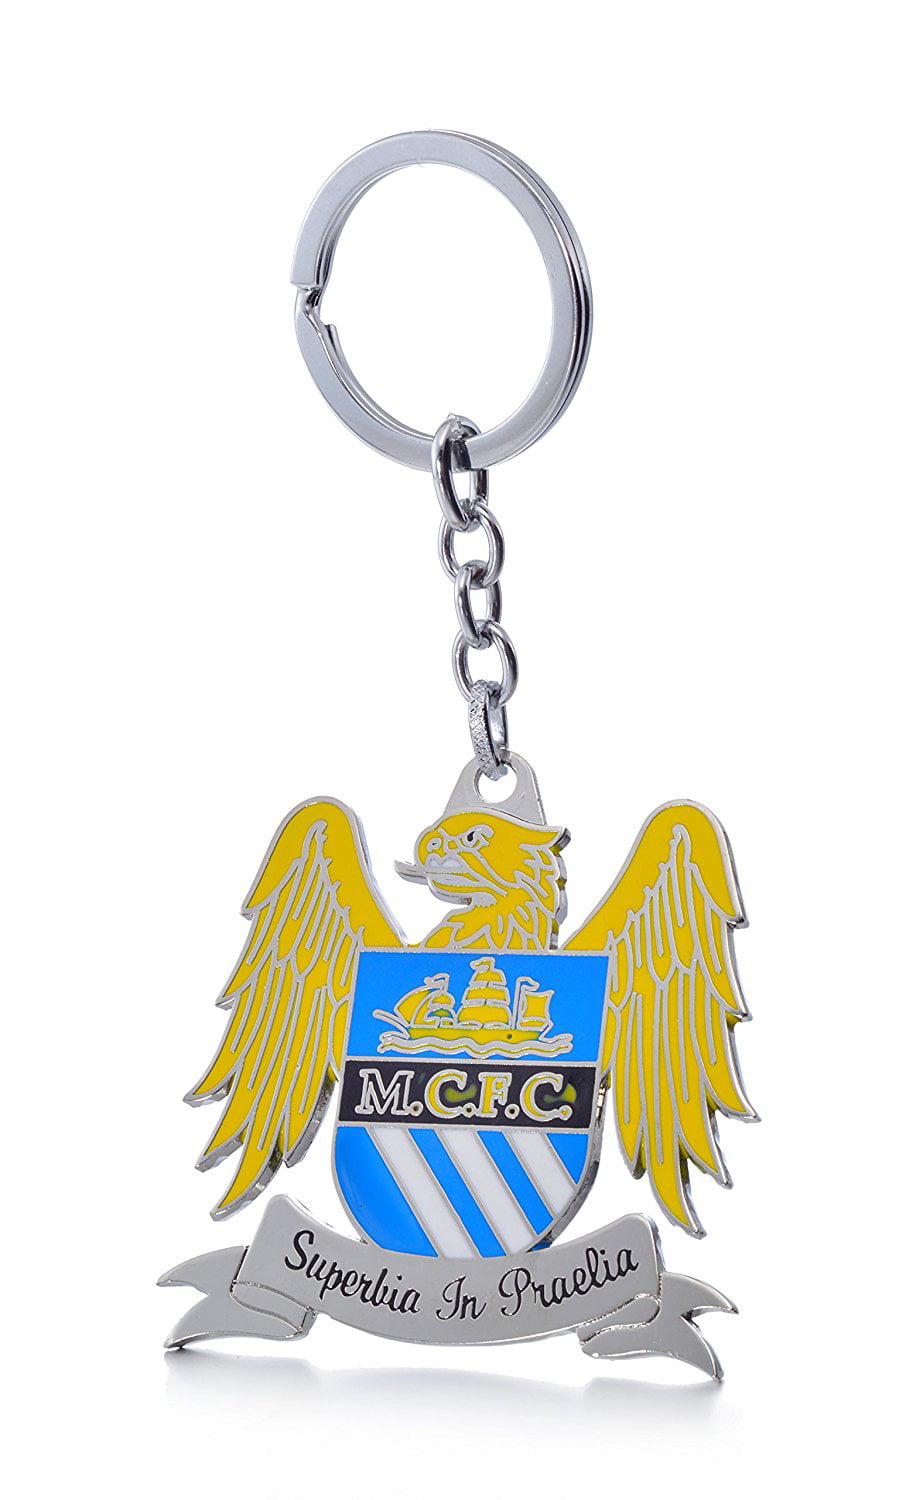 Official Soccer Team Football Club Manchester United Metal Keychain Keyring Pendant